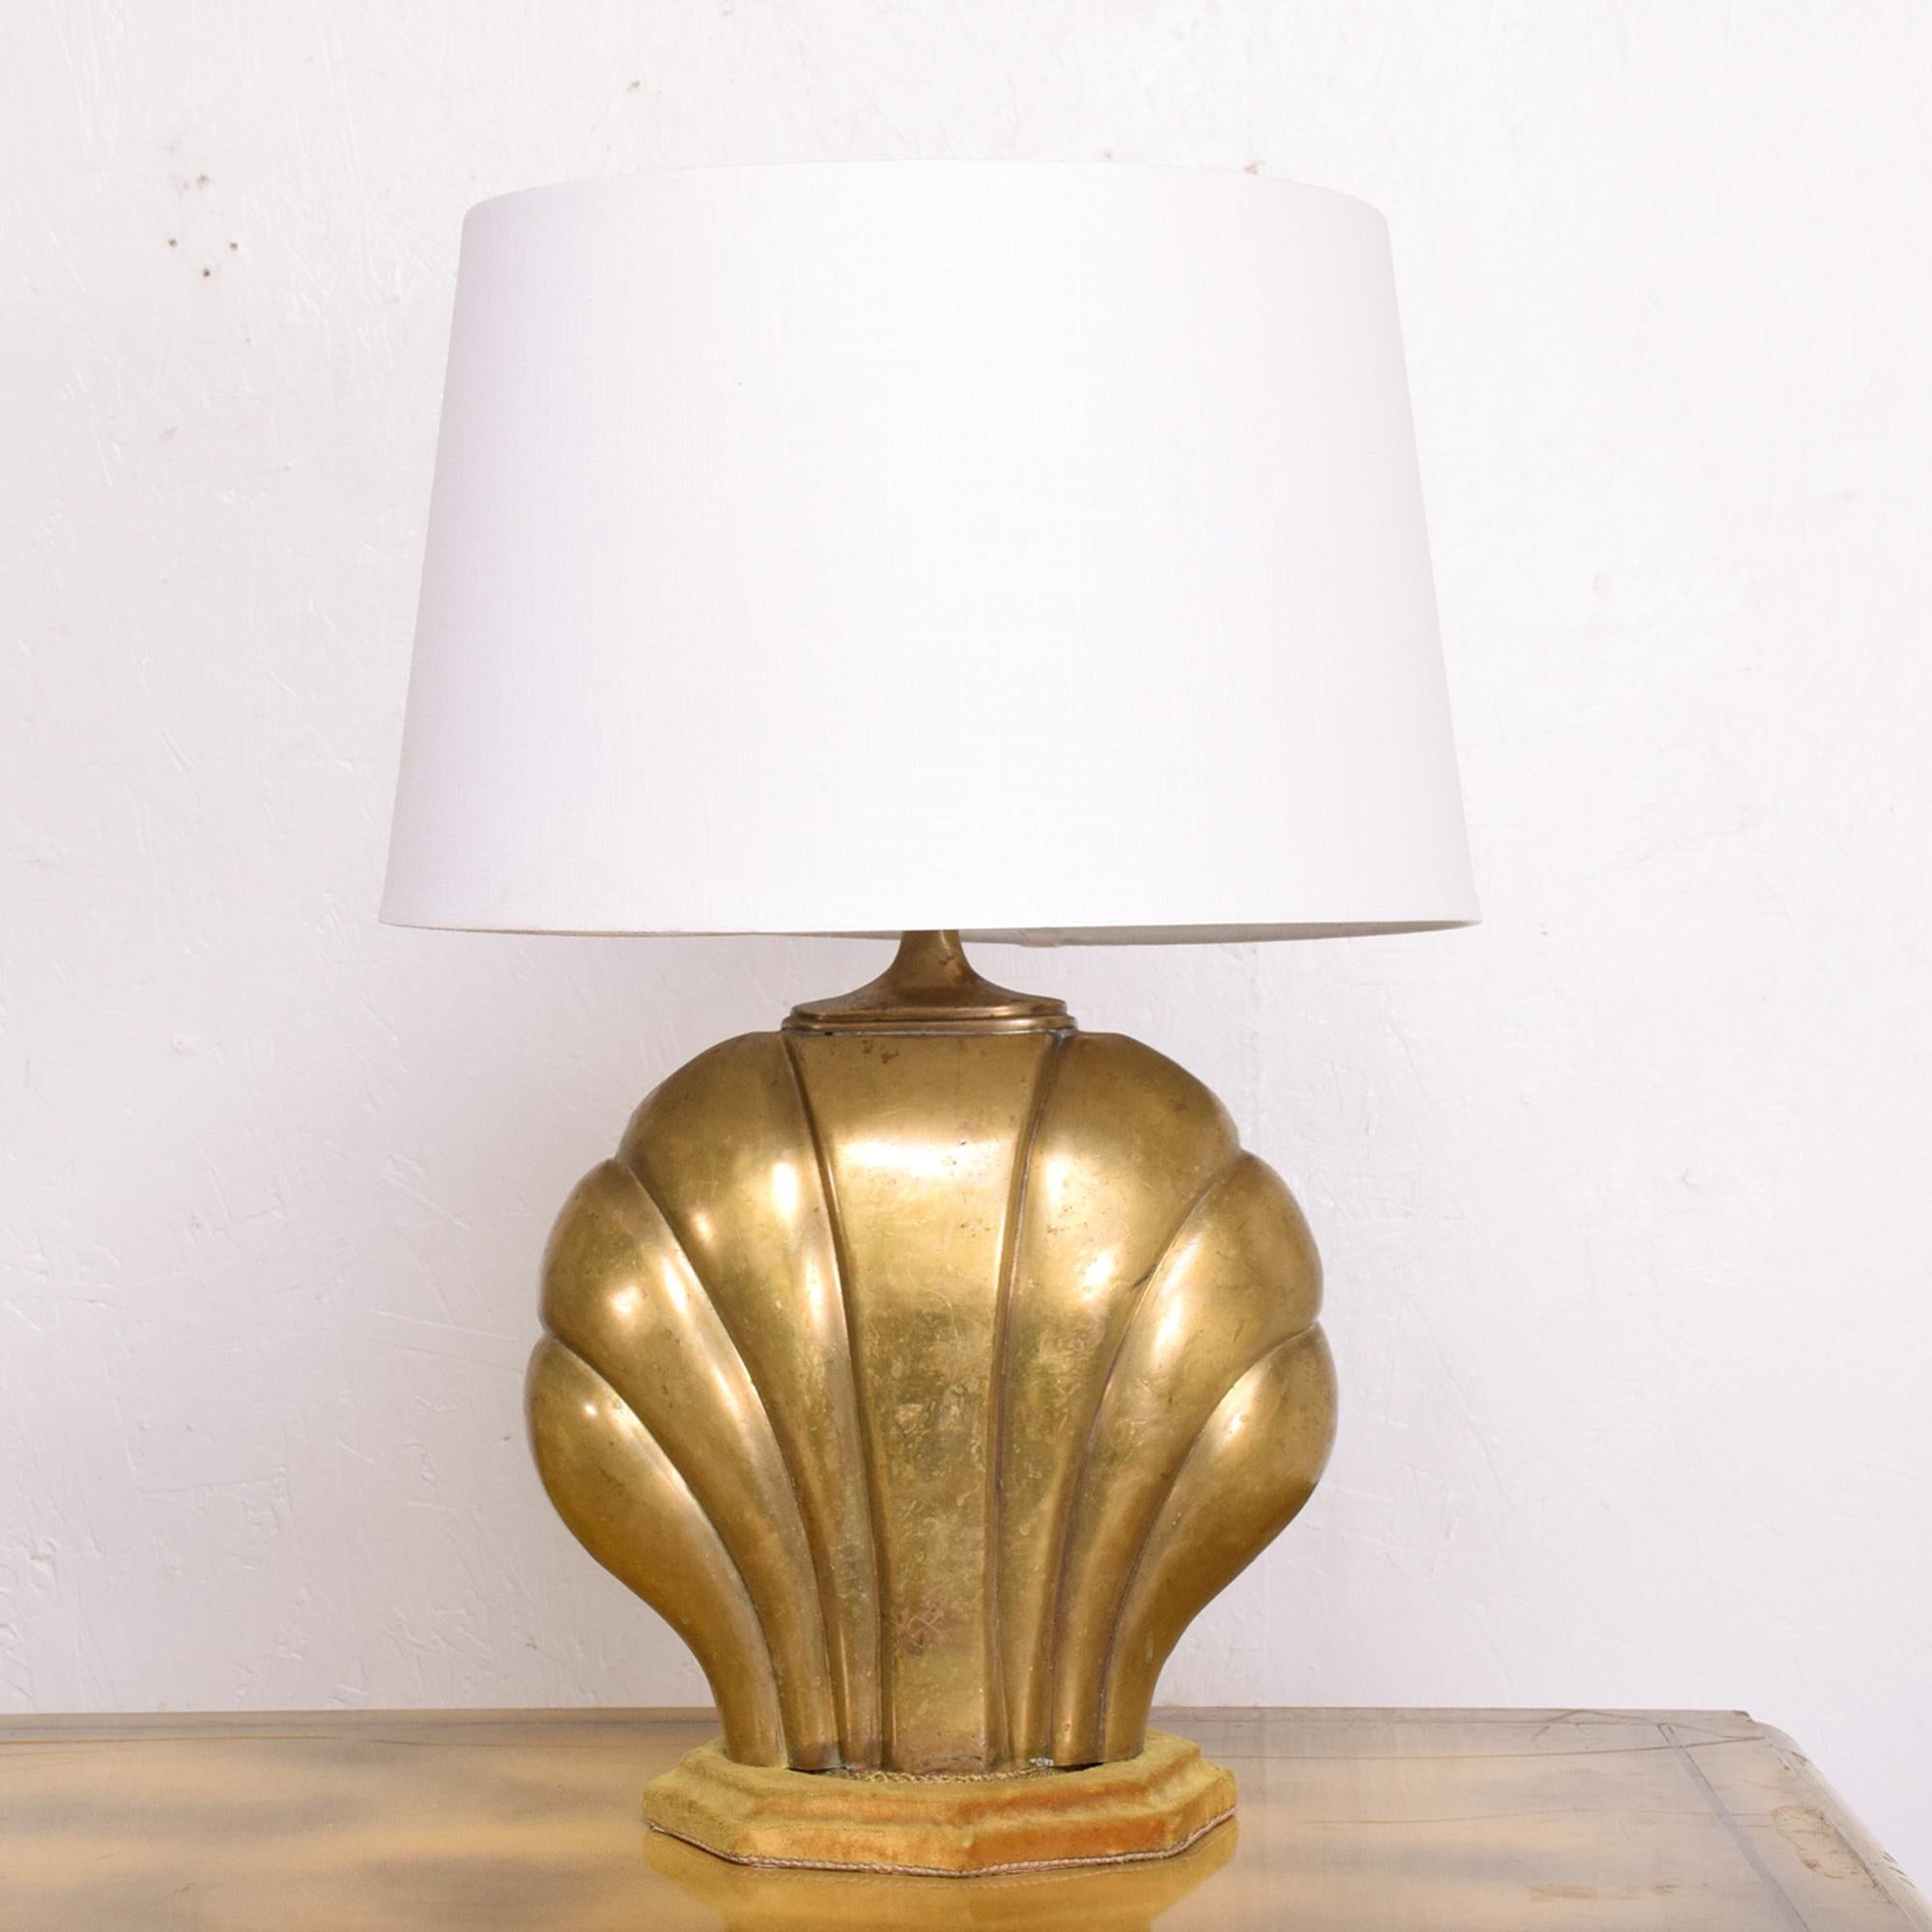 Table Lamp
Mexico 1940s by Arturo Pani Seashell Table Lamp Cast in Brass mounted on original velvet covered wood base 
Velvet base is in a golden yellow tone. No shade is included.
Rewired and ready to go. 
16 tall (base of the socket) x 12 W x 8.5D